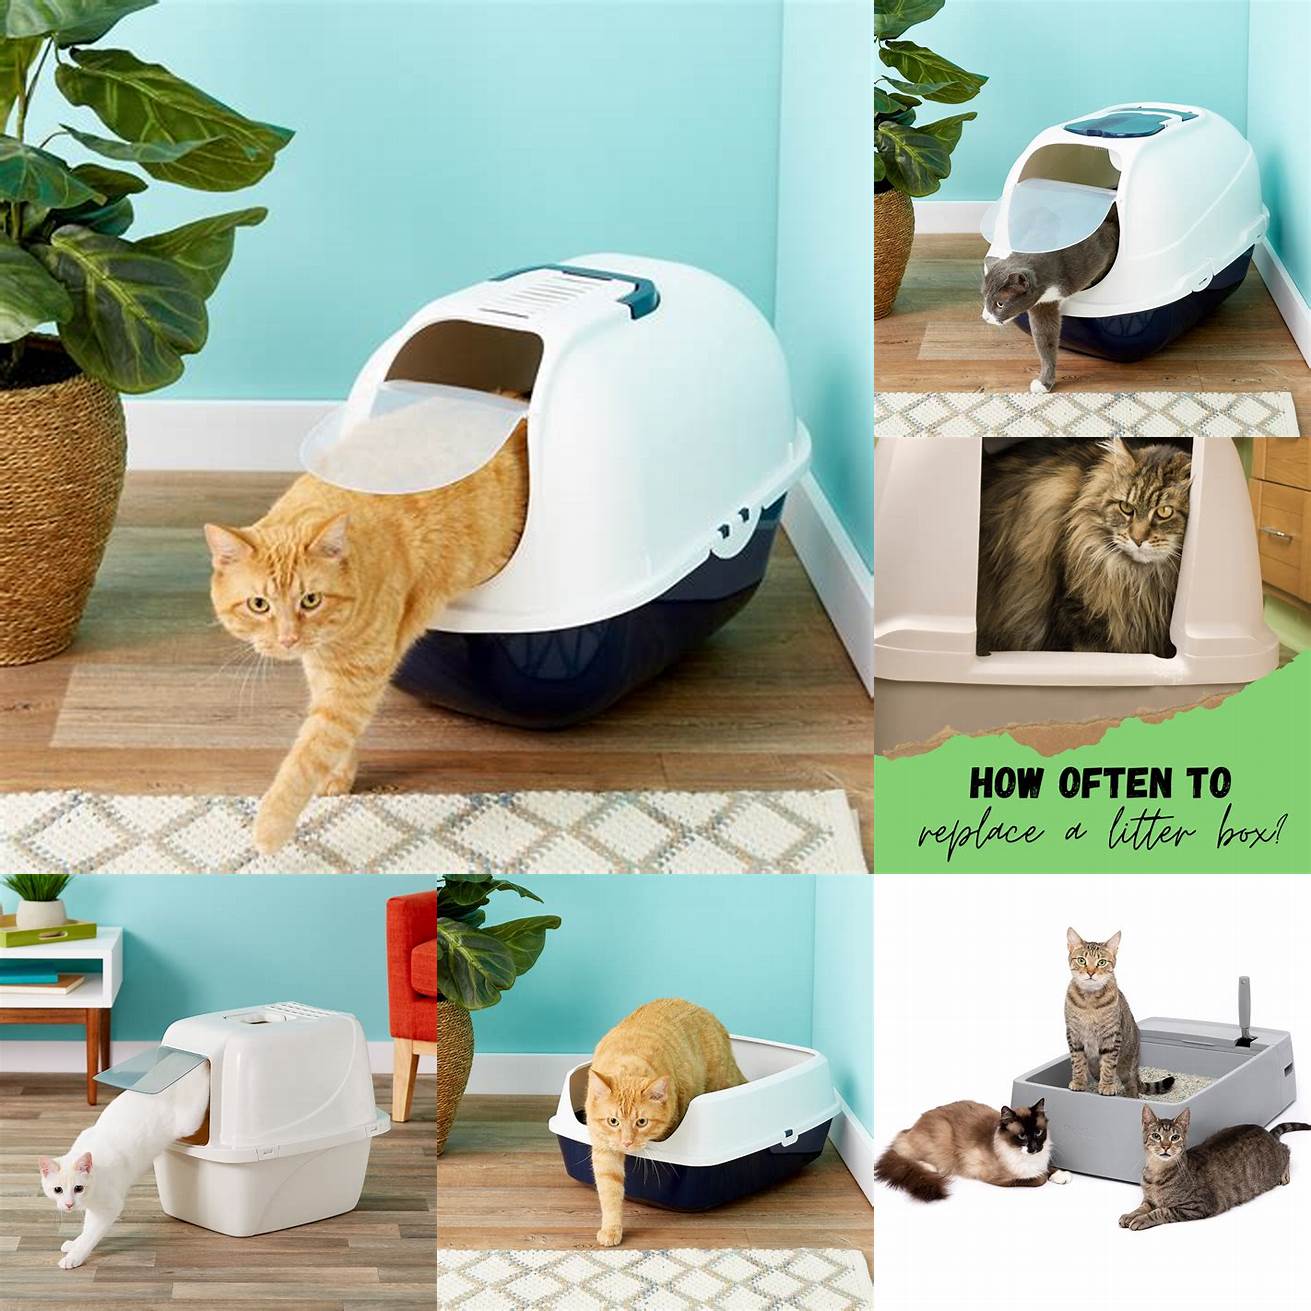 6 Replace the Litter Box